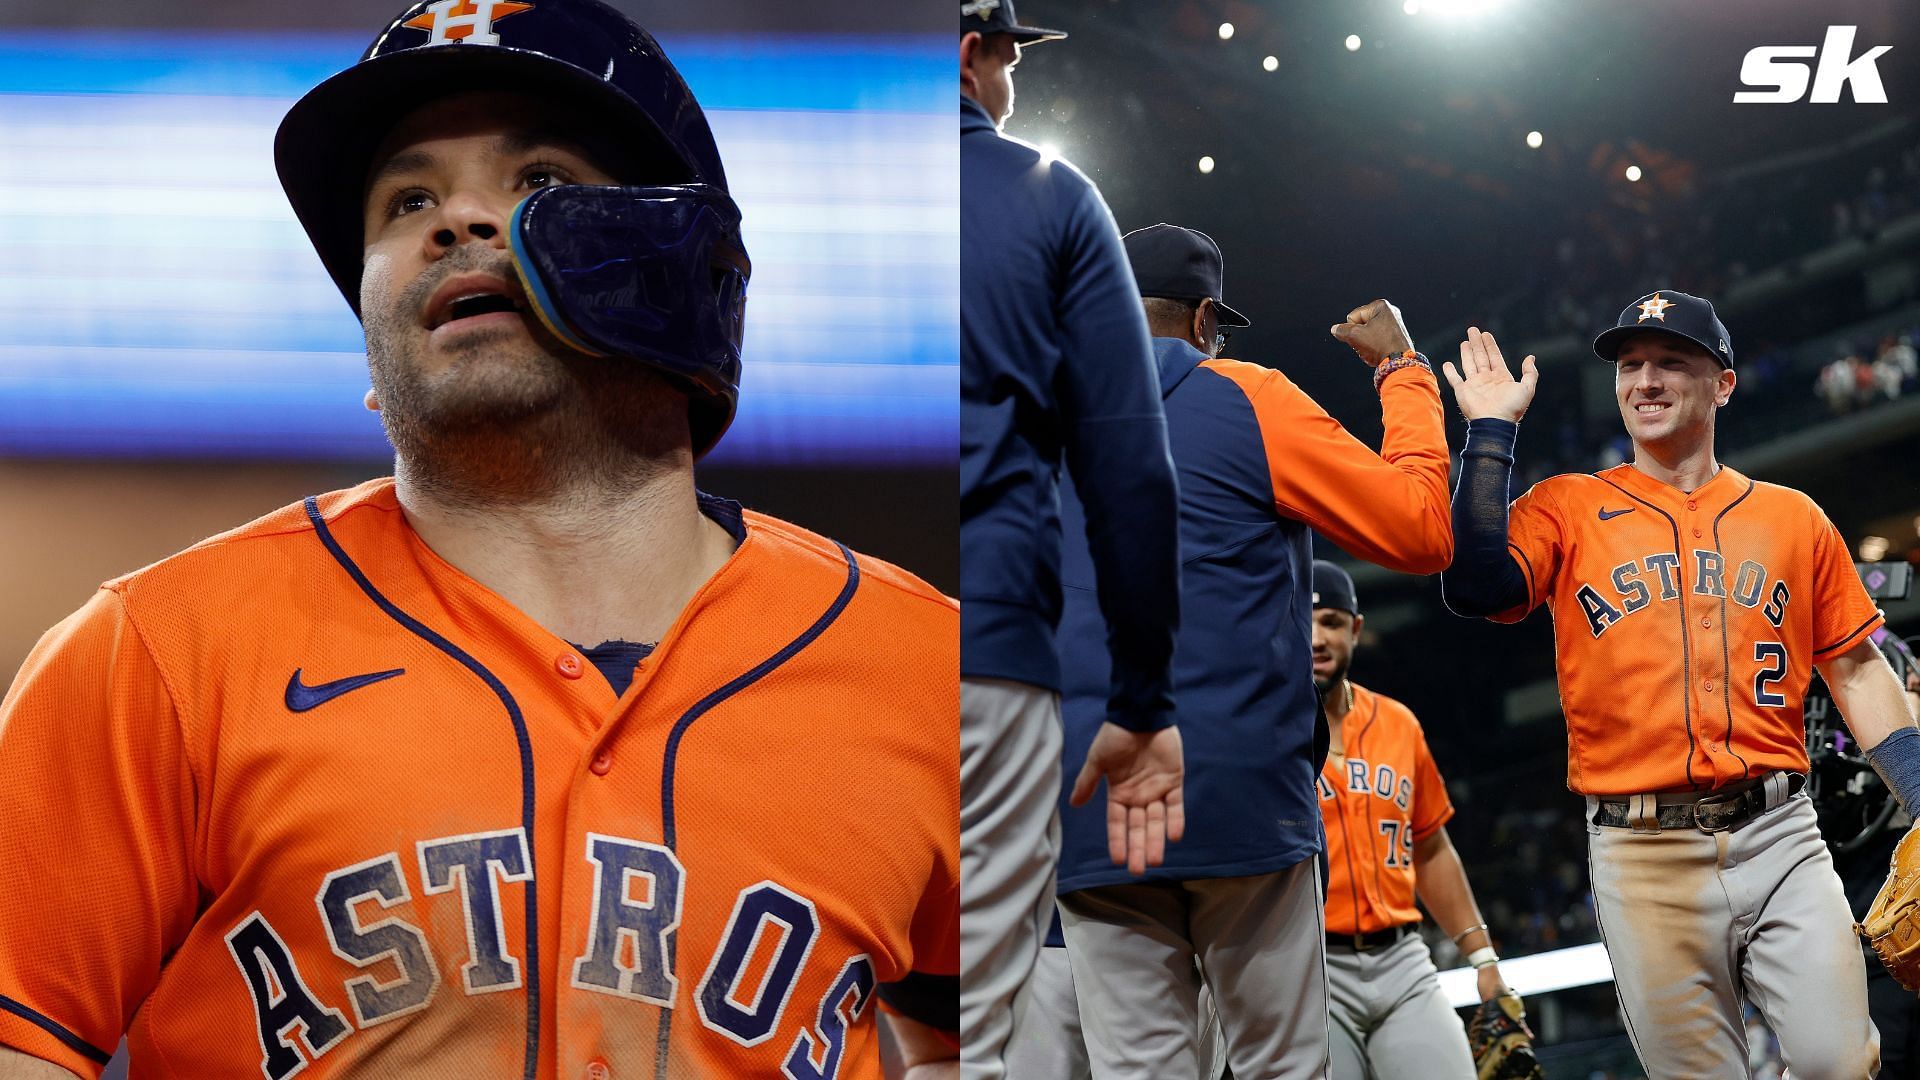 Rangers fans in shambles as Astros even series after victory in Game 4 of ALCS. 